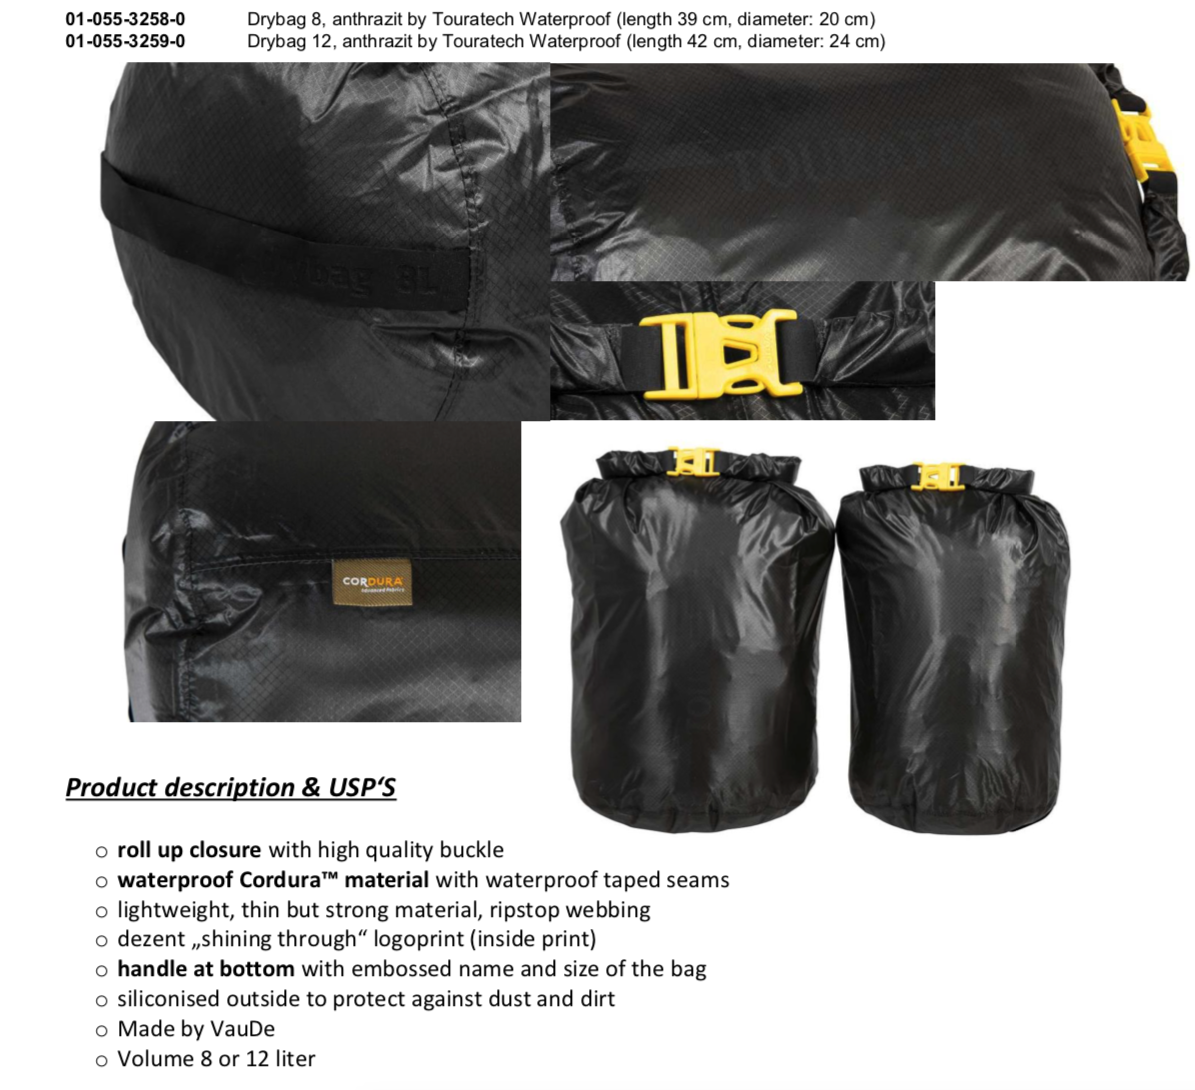 Drybag 12, anthrazit by Touratech Waterproof